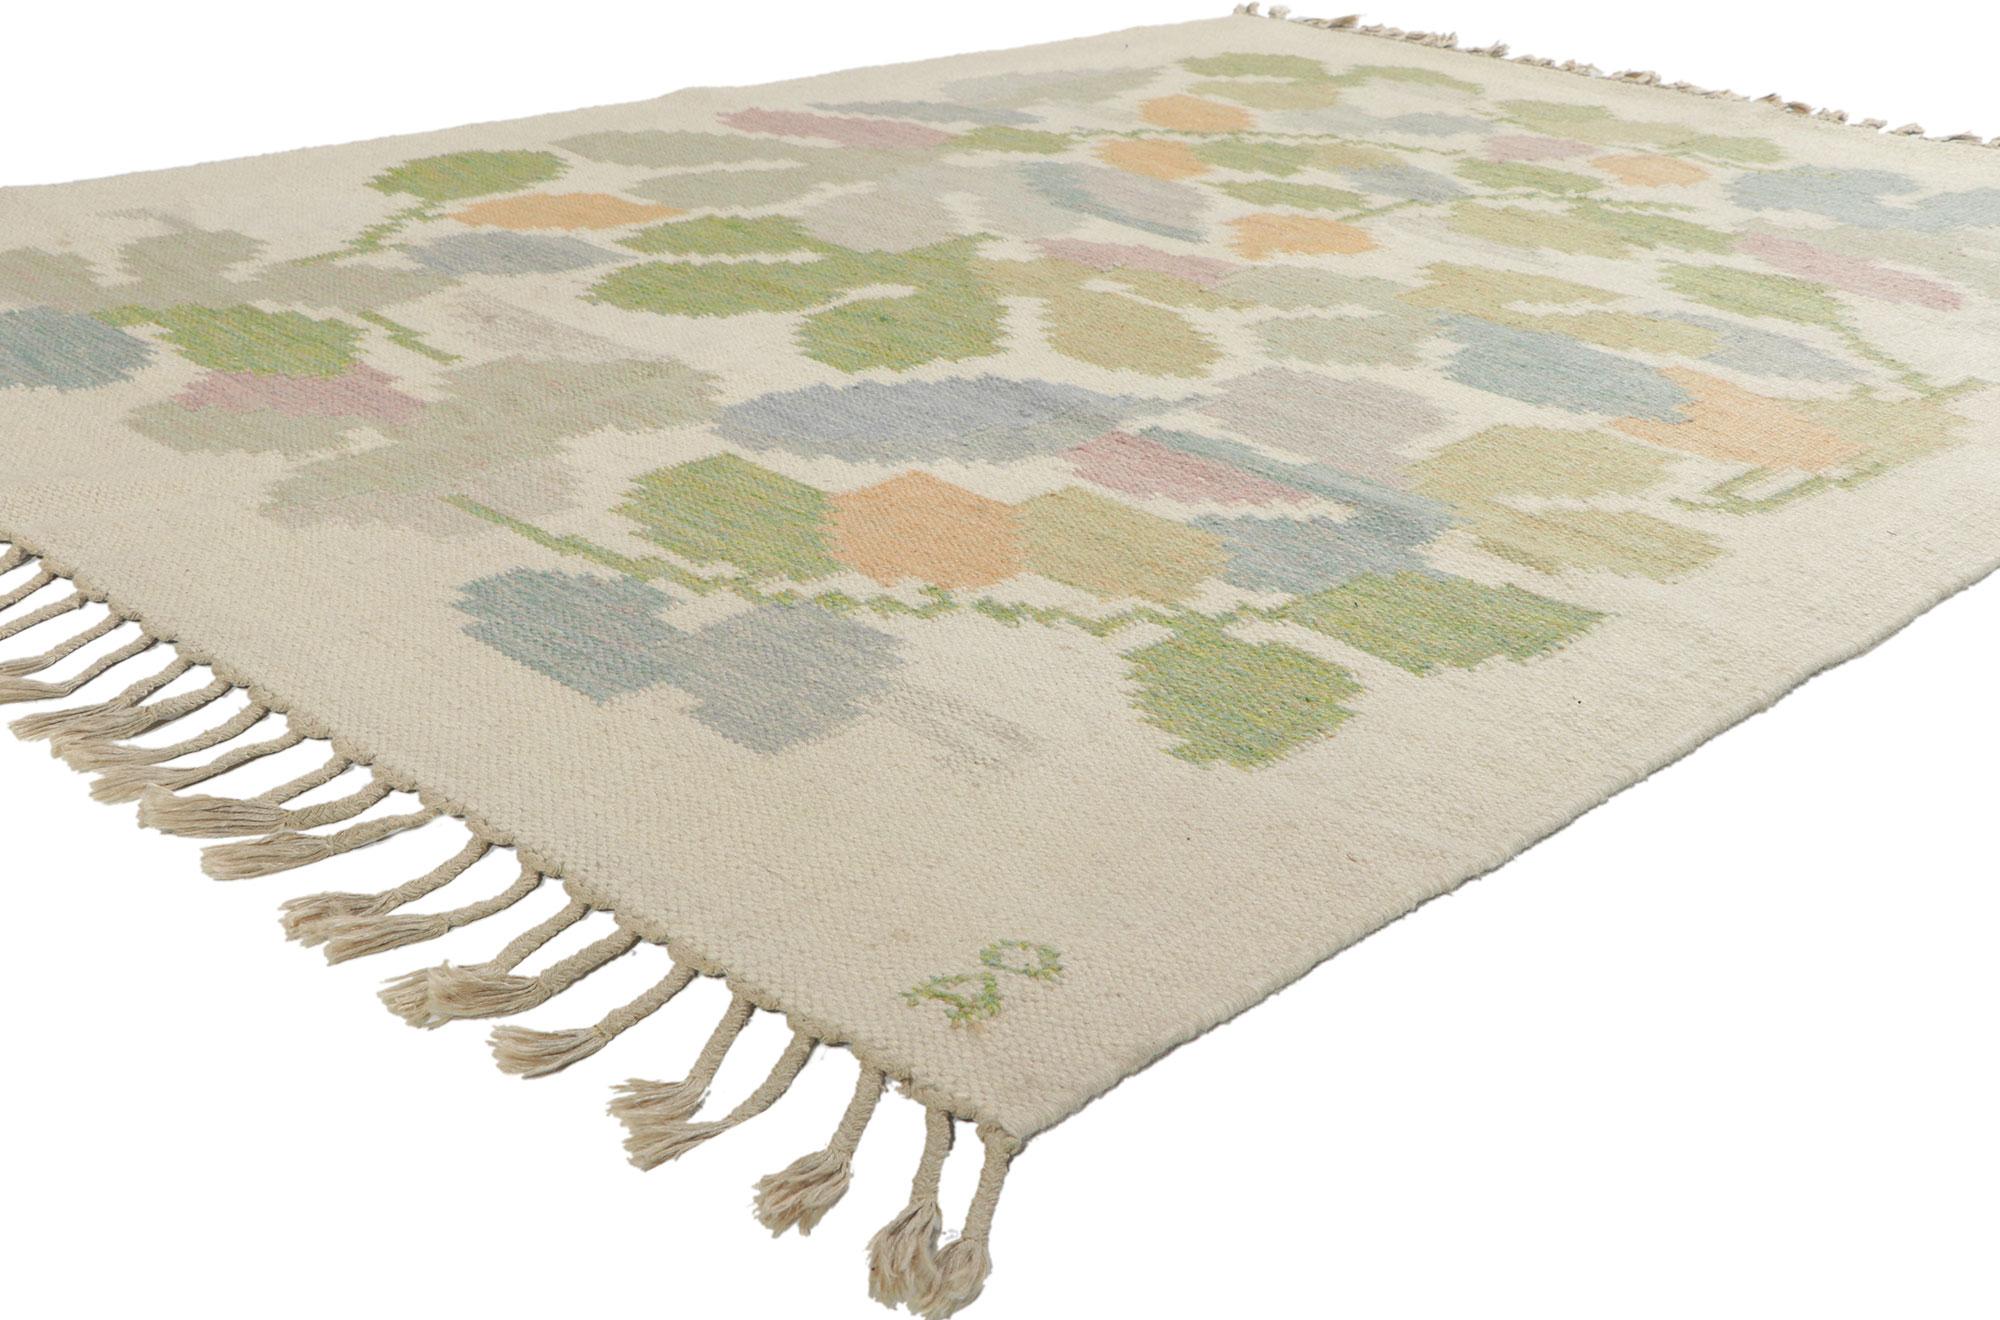 78500 Anna-Johanna Angstrom Vintage Swedish Kilim Rollakan Rug, 05'08 x 07'06. Emanating Scandinavian Modern style with incredible detail and texture, this handwoven Swedish rollakan rug is a captivating vision of woven beauty. The eye-catching